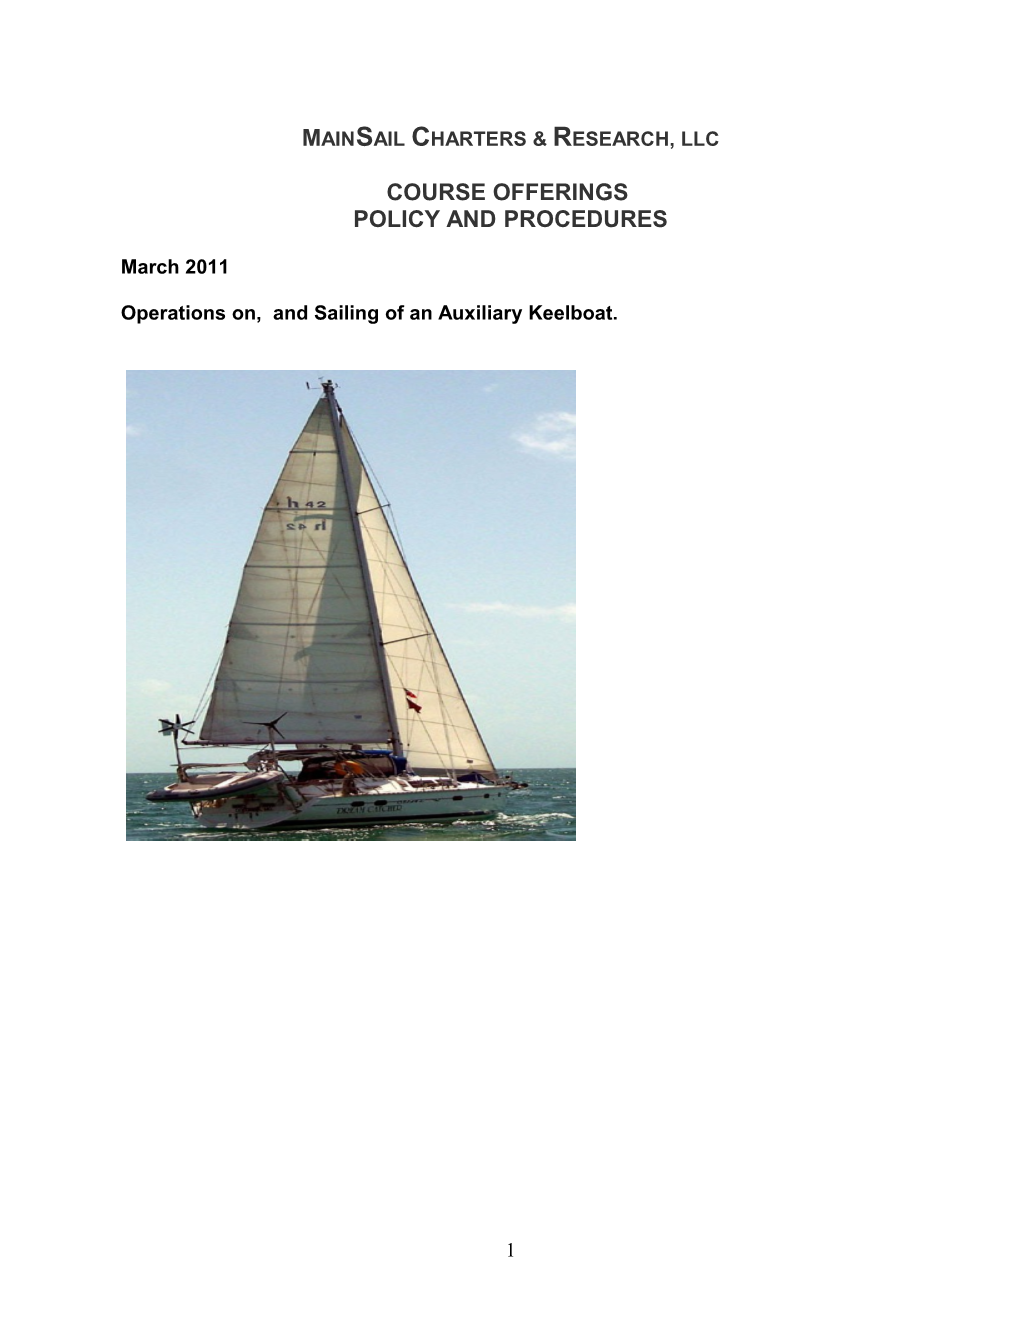 Course Level 1: Operation and Sailing of an Auxiliary Keelboat